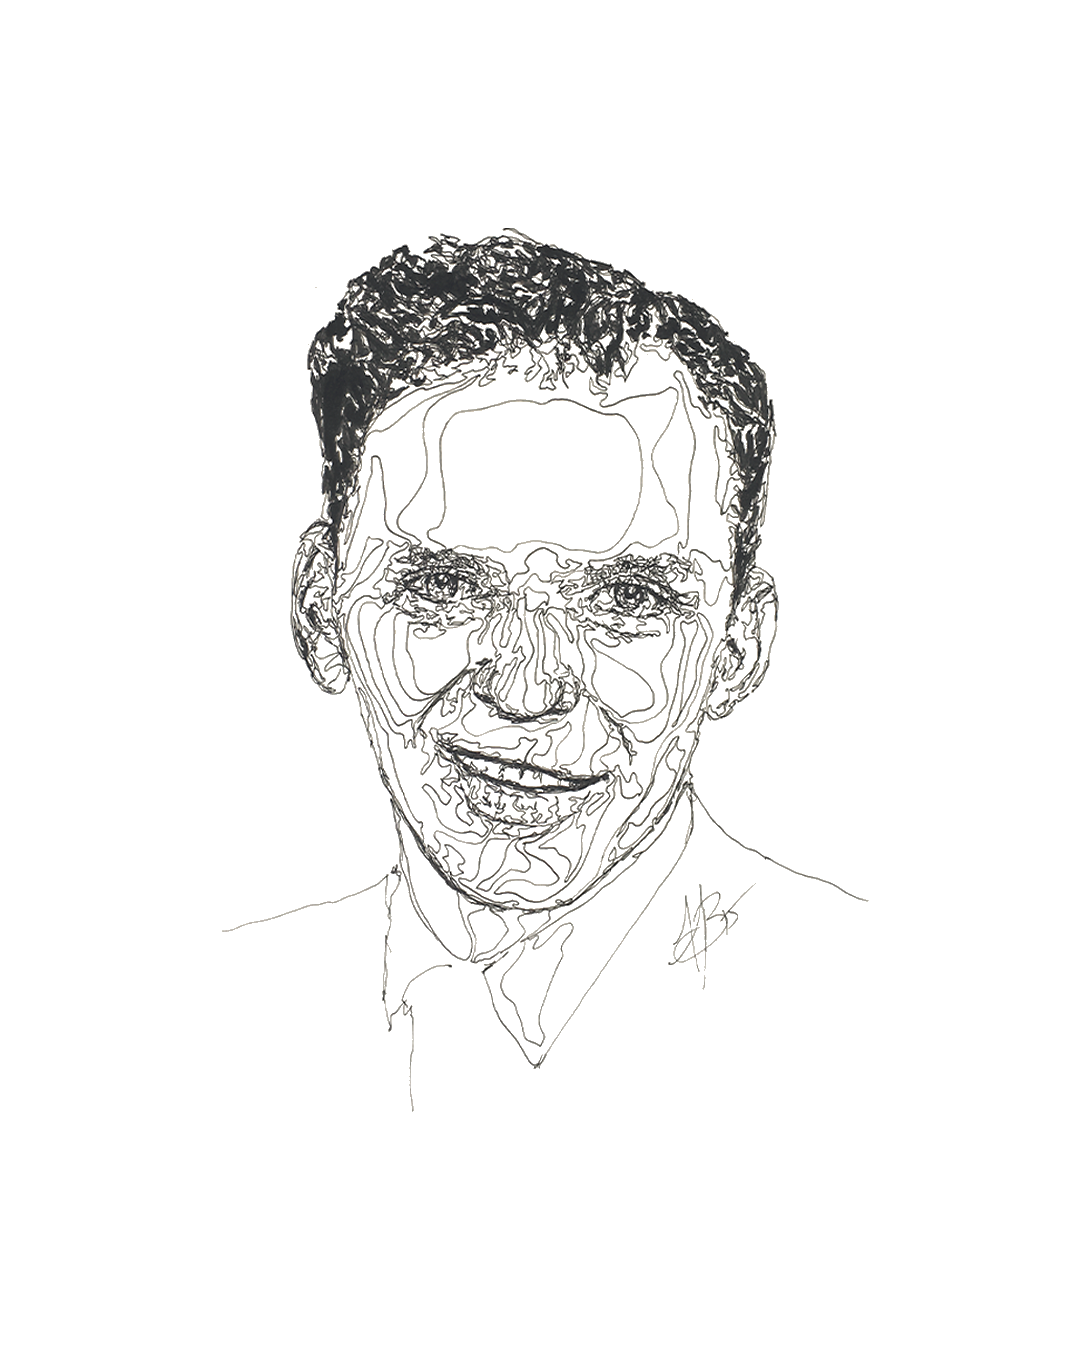 the chairman of the board, Frank Sinatra line art drawing